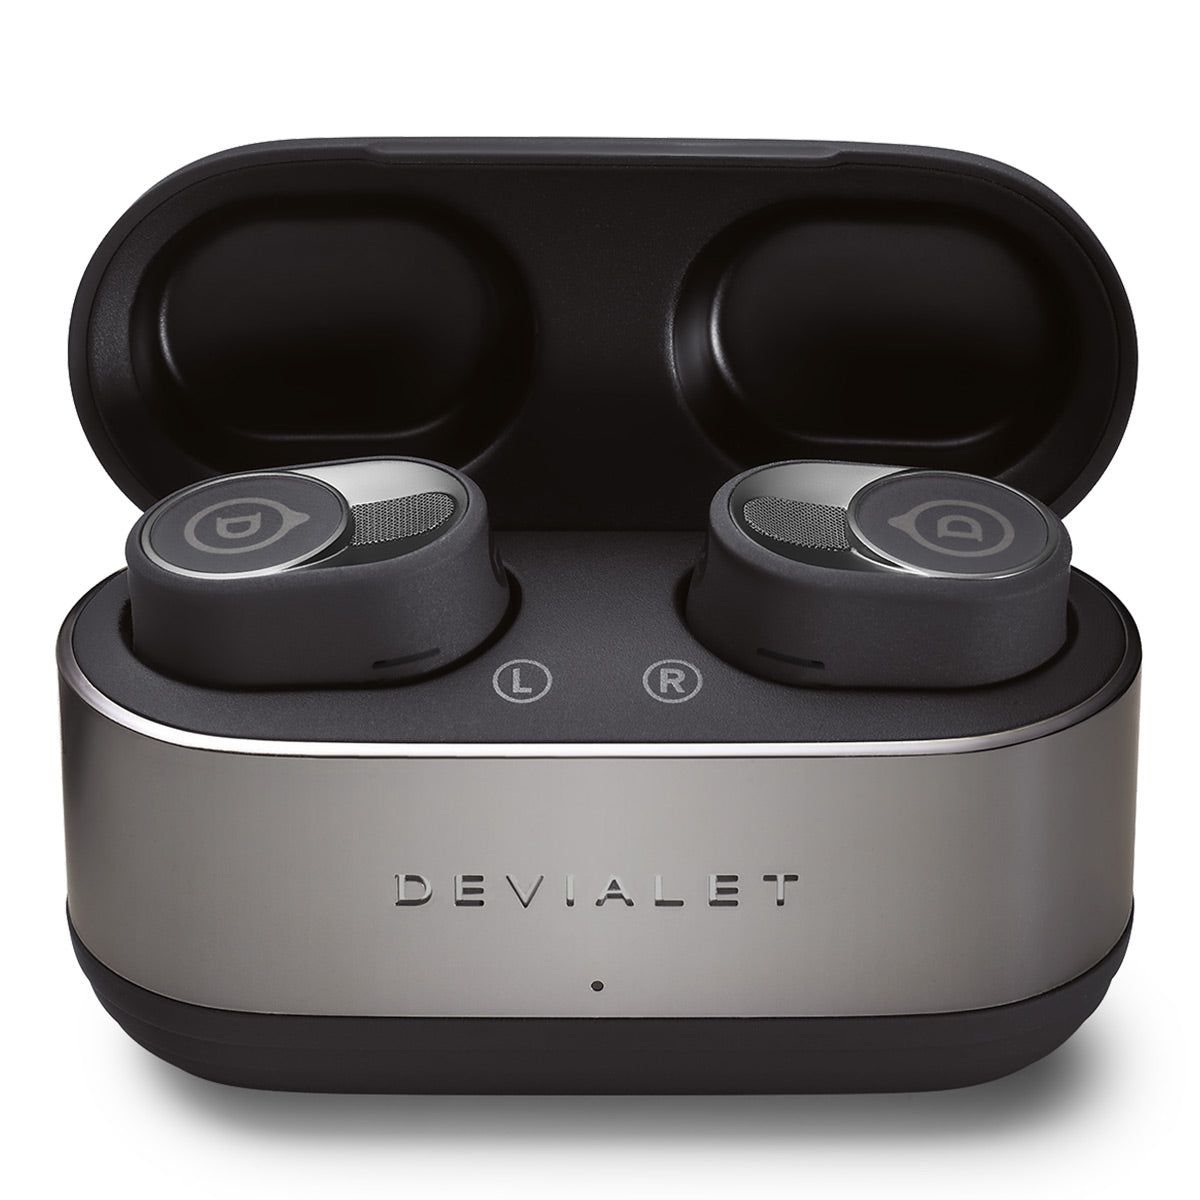 Devialet Gemini II True Wireless Bluetooth Earbuds with Adaptive Noise Cancellation and Water Resistance (Matte Black)